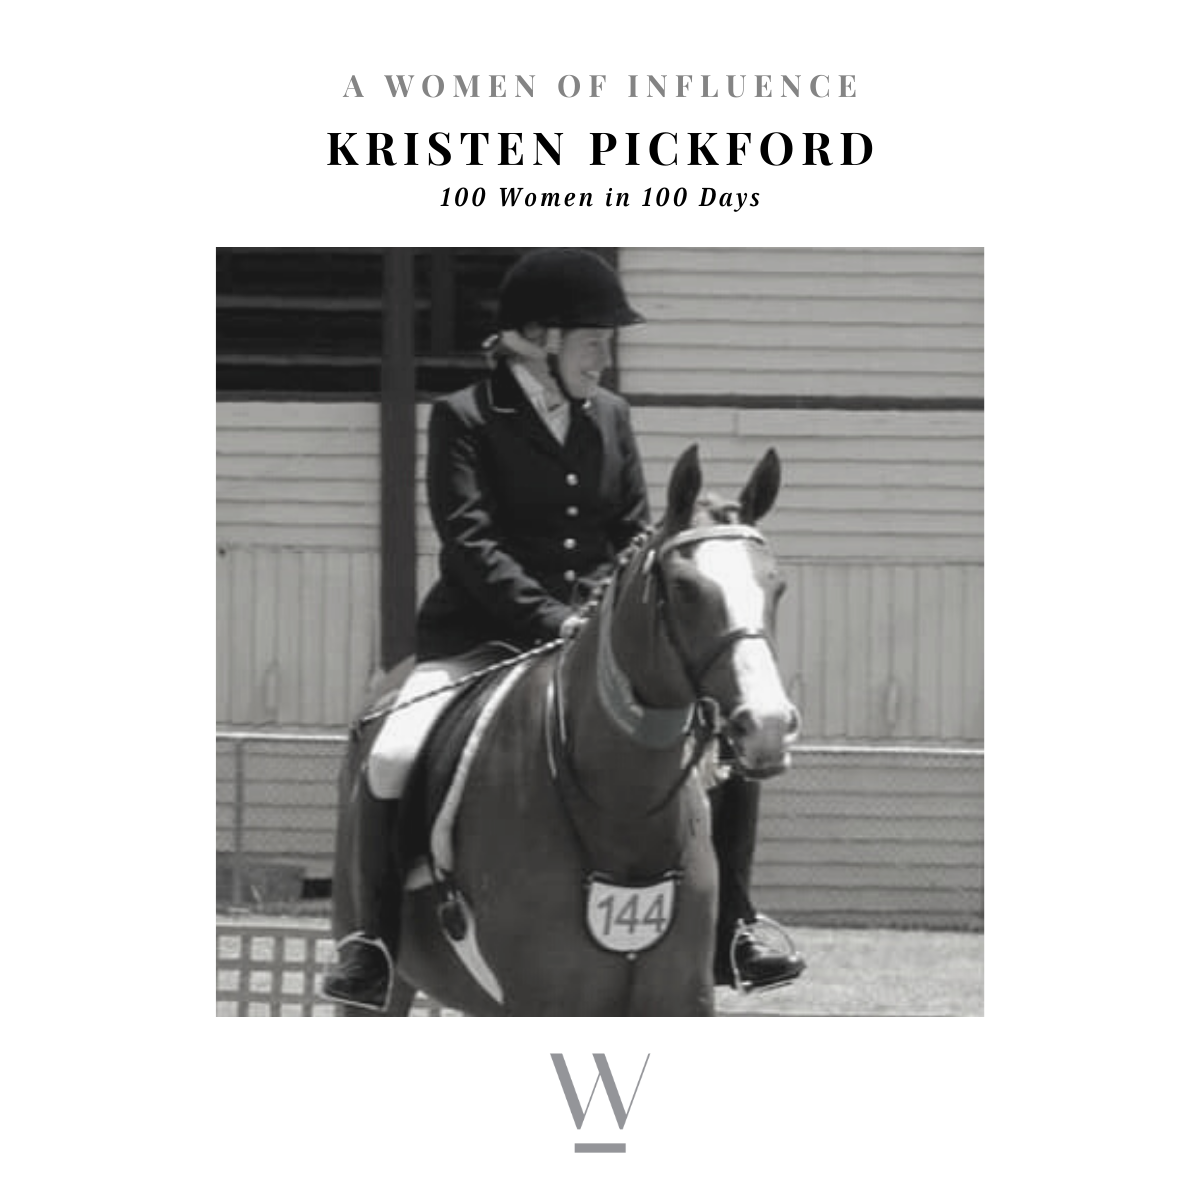 49/100: KRISTEN PICKFORD: This day we were flying. It was perfect